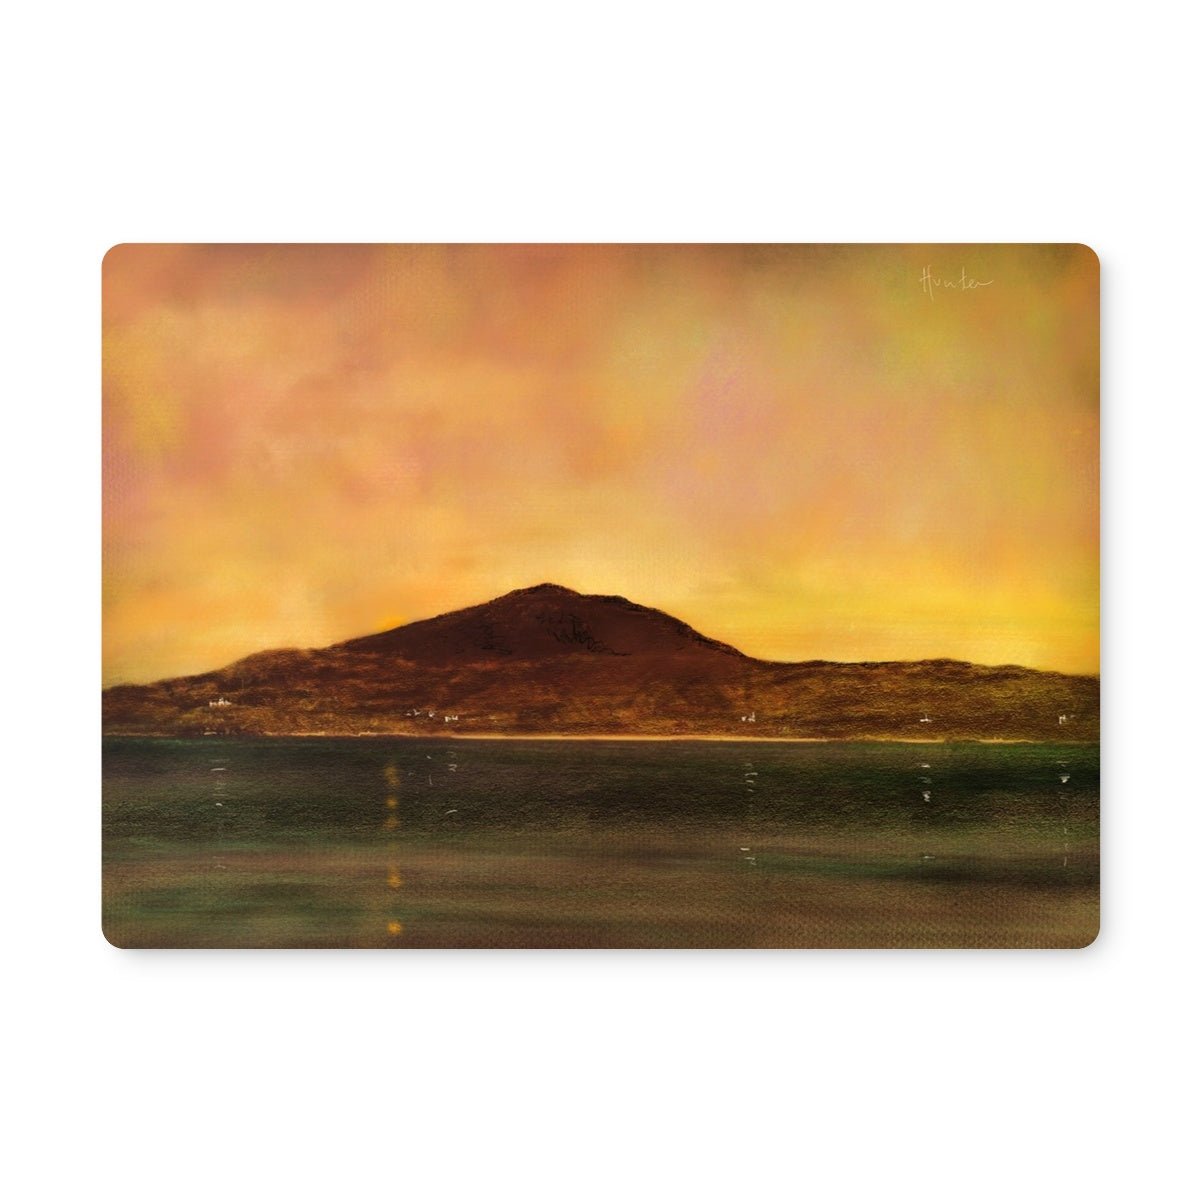 Eriskay Dusk Art Gifts Placemat-Placemats-Hebridean Islands Art Gallery-6 Placemats-Paintings, Prints, Homeware, Art Gifts From Scotland By Scottish Artist Kevin Hunter